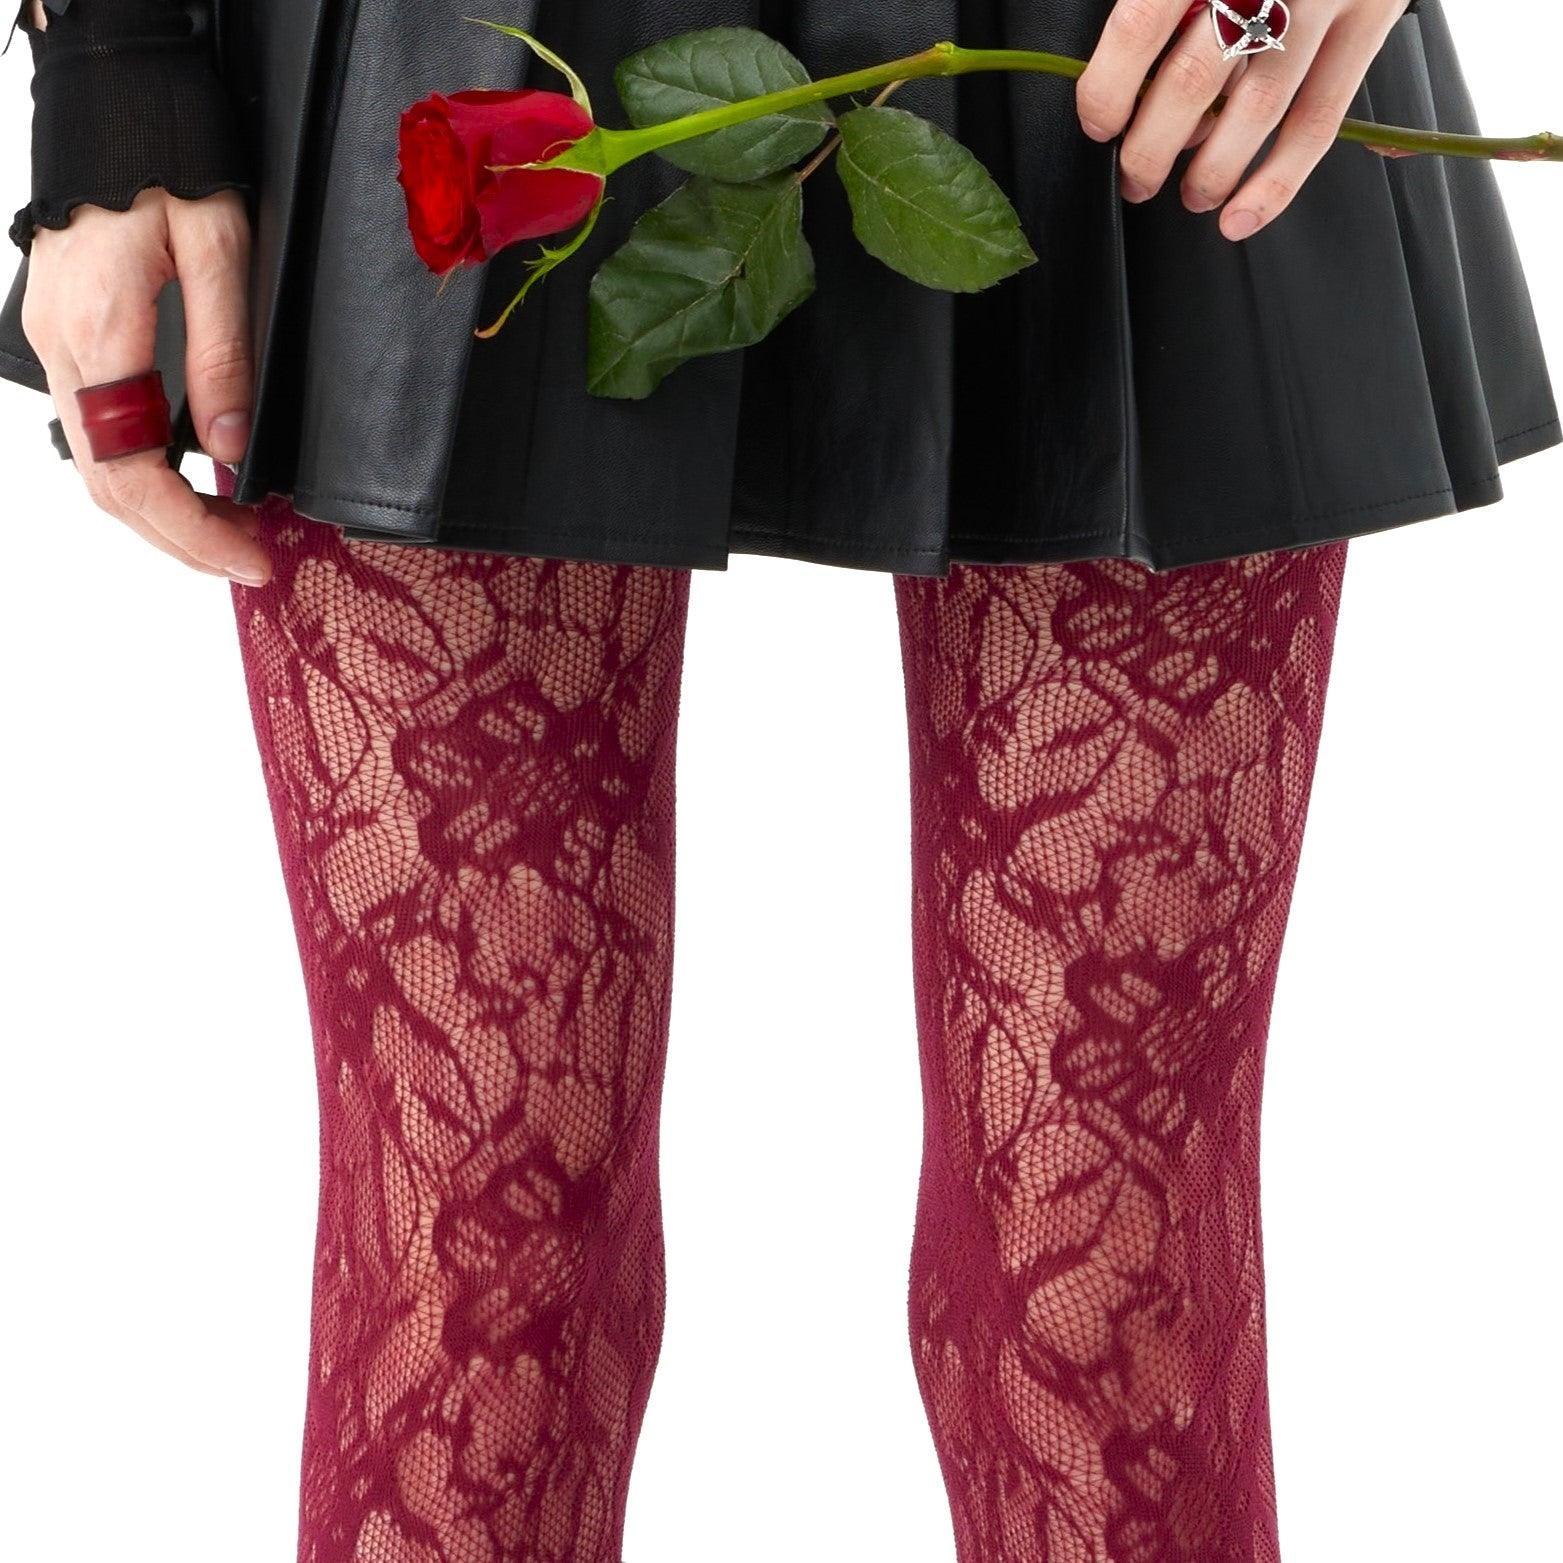 Delicate Floral Patterns Tights - Uniqvibe